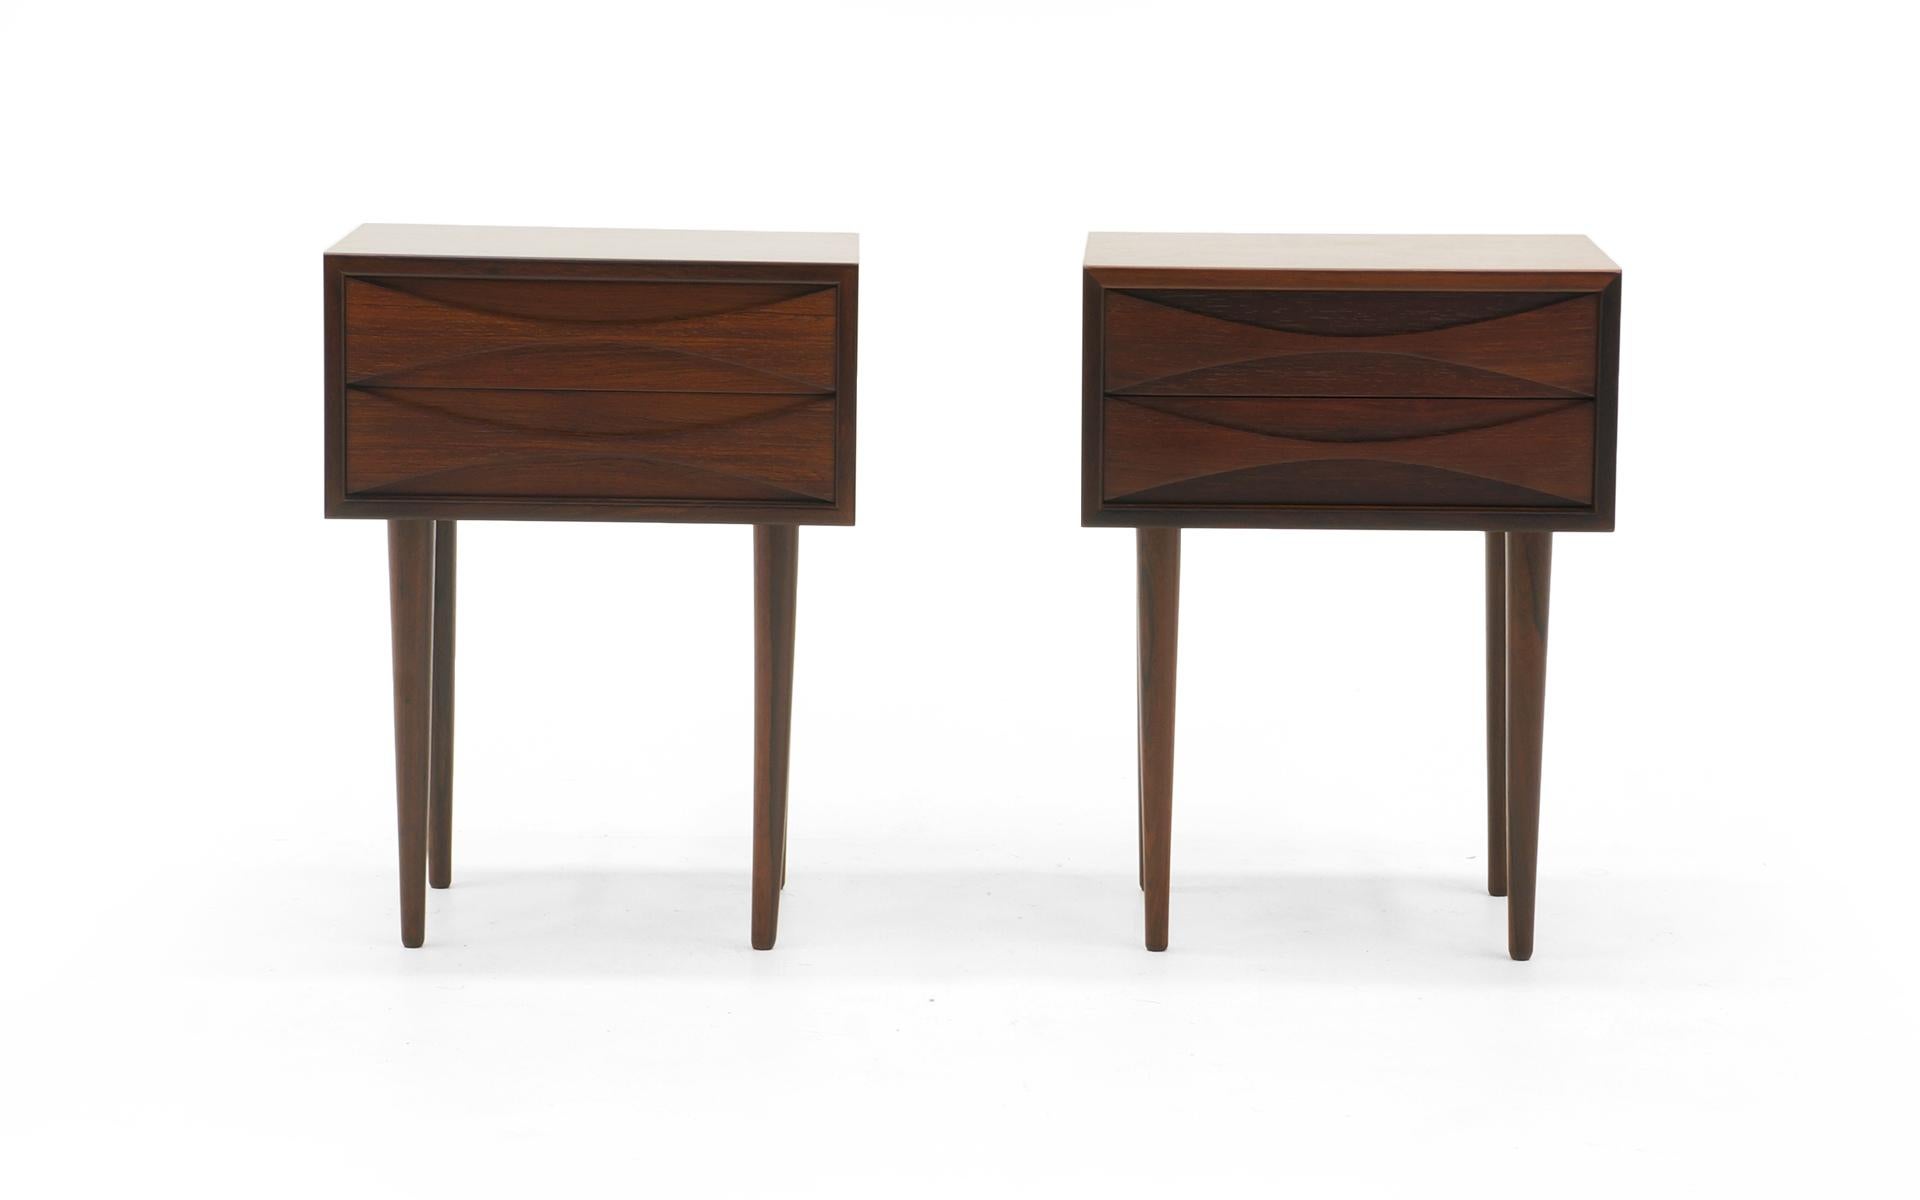 Rare pair of Arne Vodder Danish modern, Brazilian rosewood side / night tables. Expertly refinished. Small, tall scale.